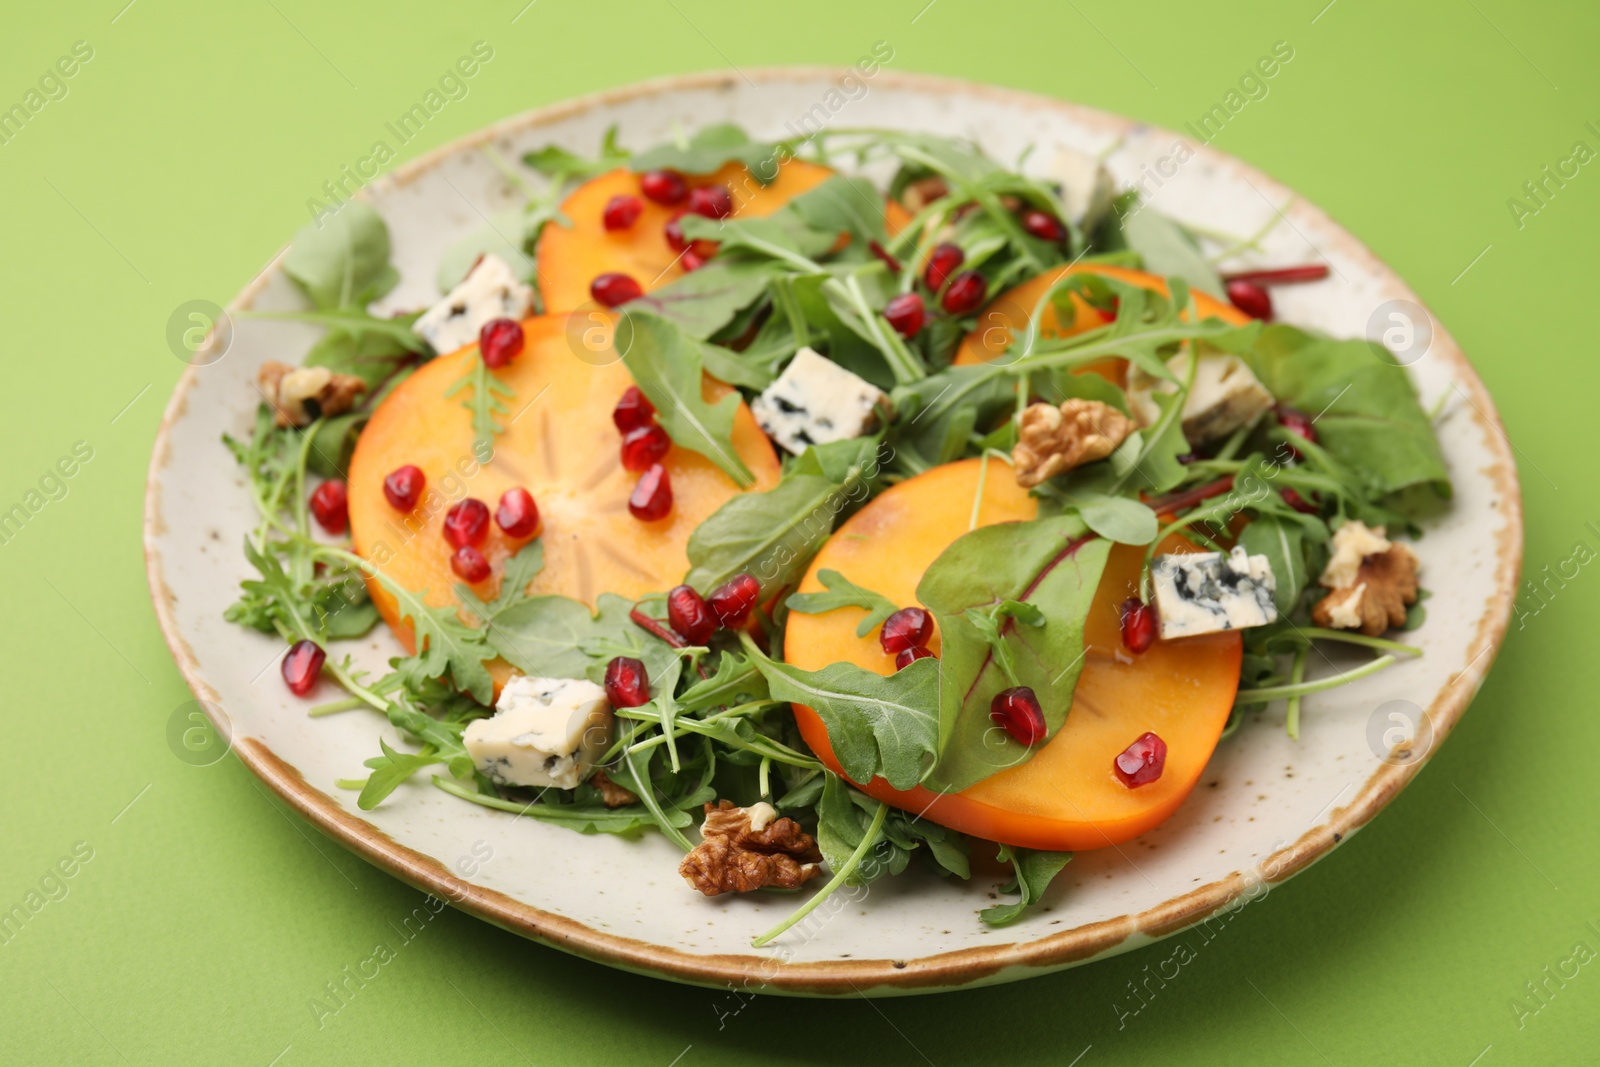 Photo of Tasty salad with persimmon, blue cheese and walnuts served on light green background